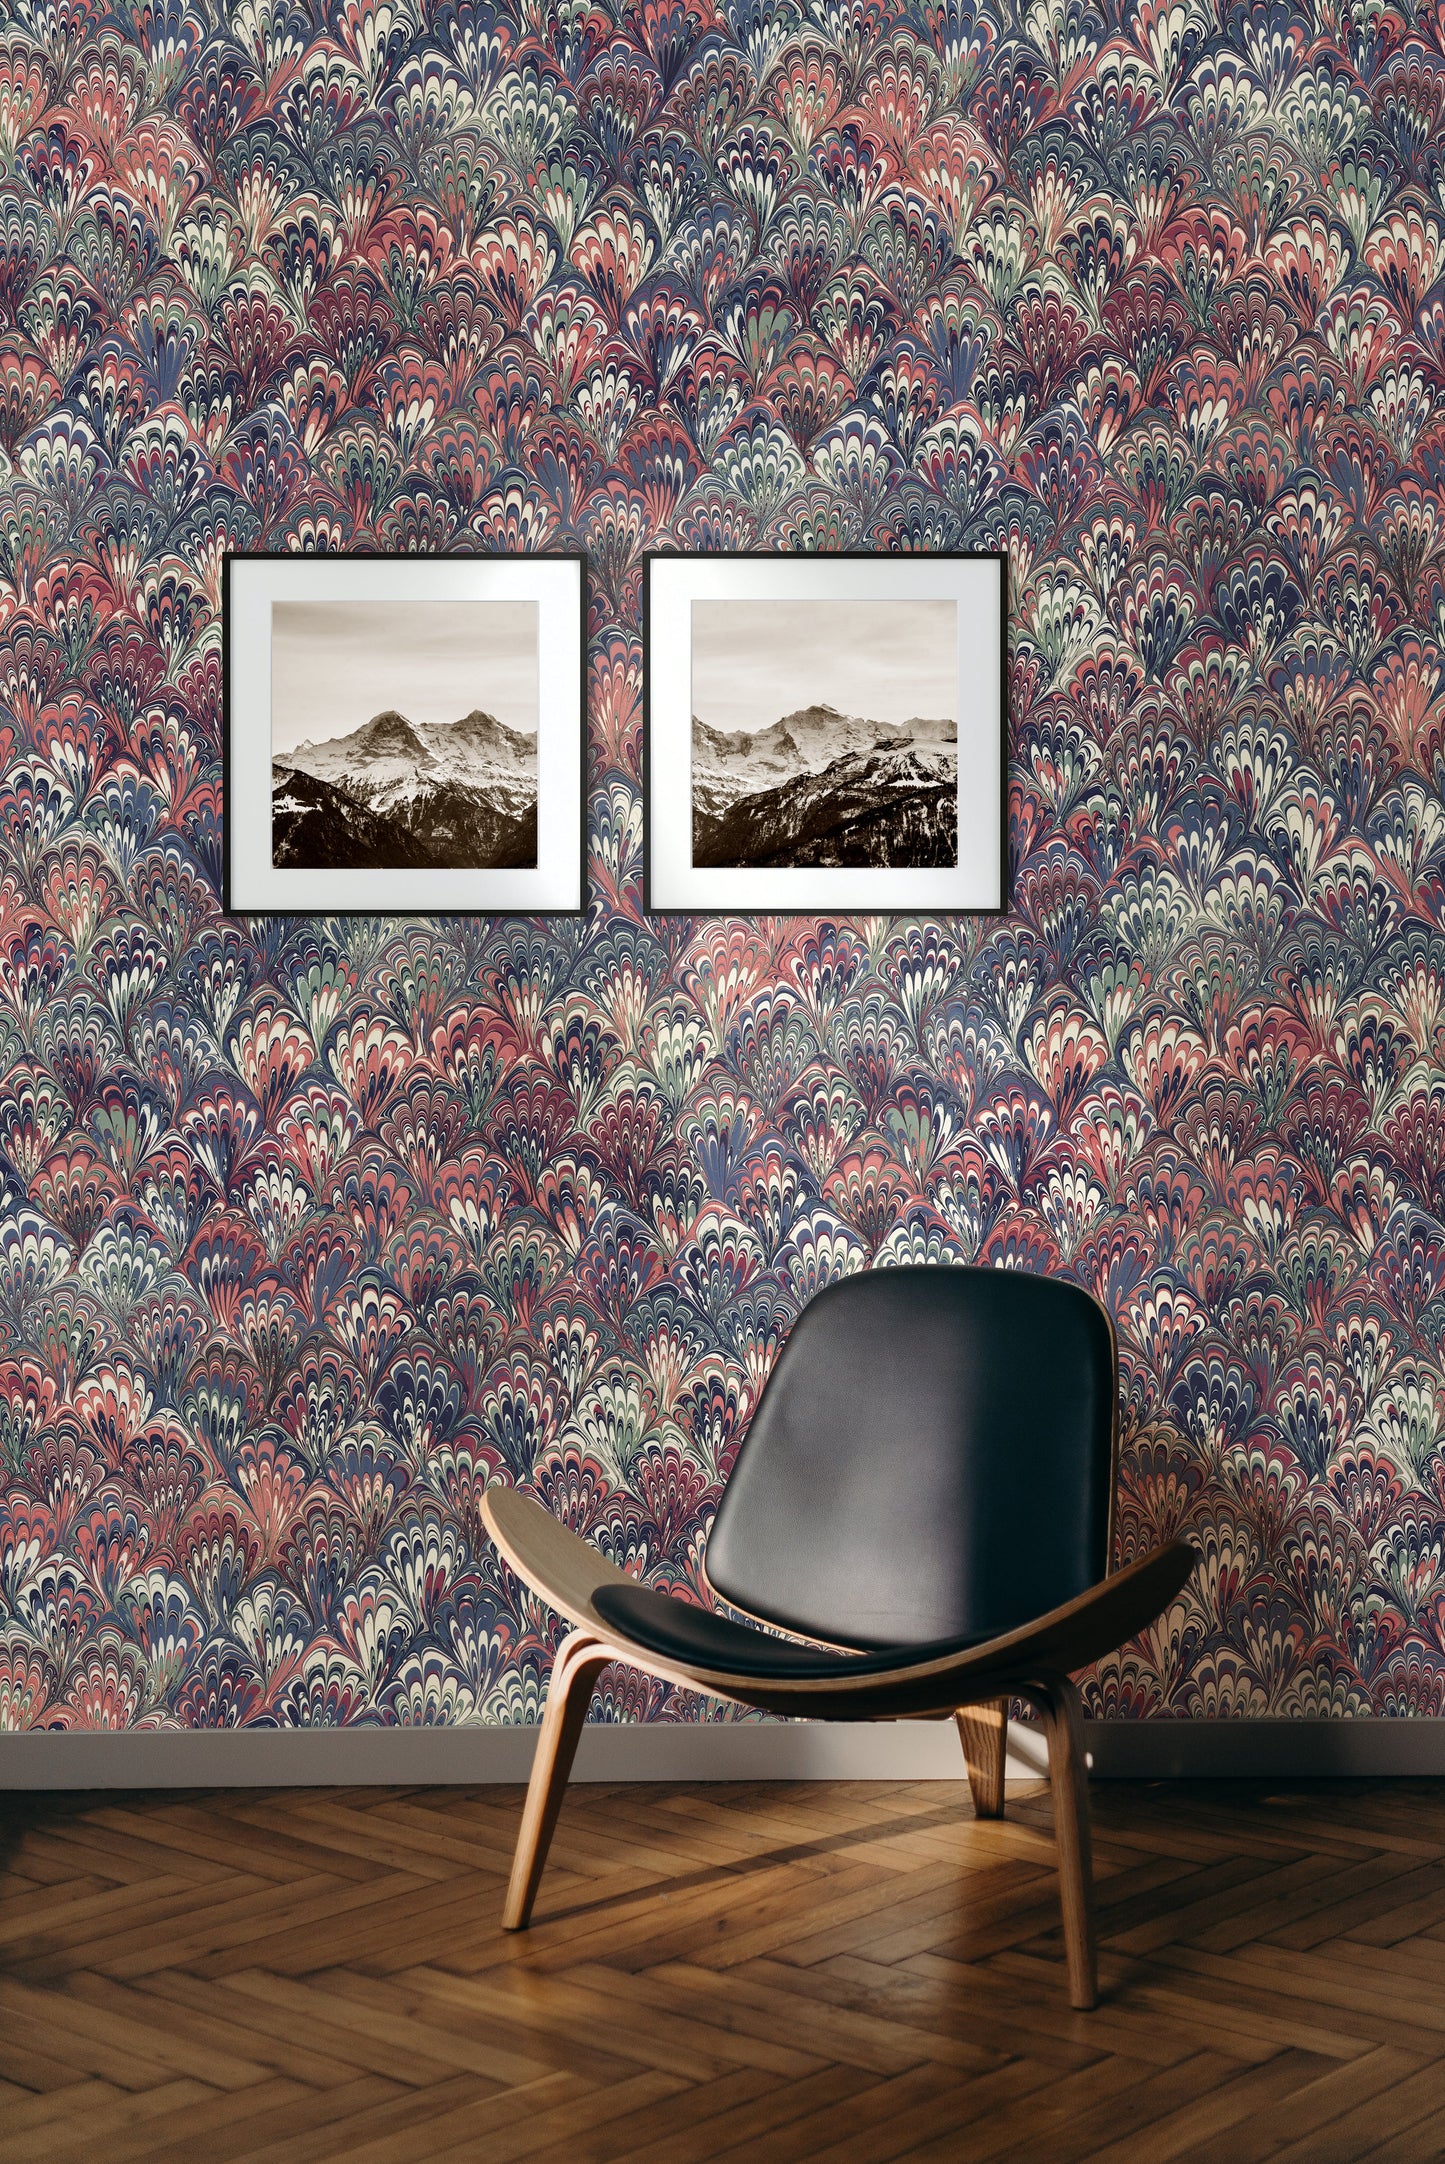 In Stock: Printed Wallpaper - 'Serpentine' Col: Summer- Mica Coated Non-Woven